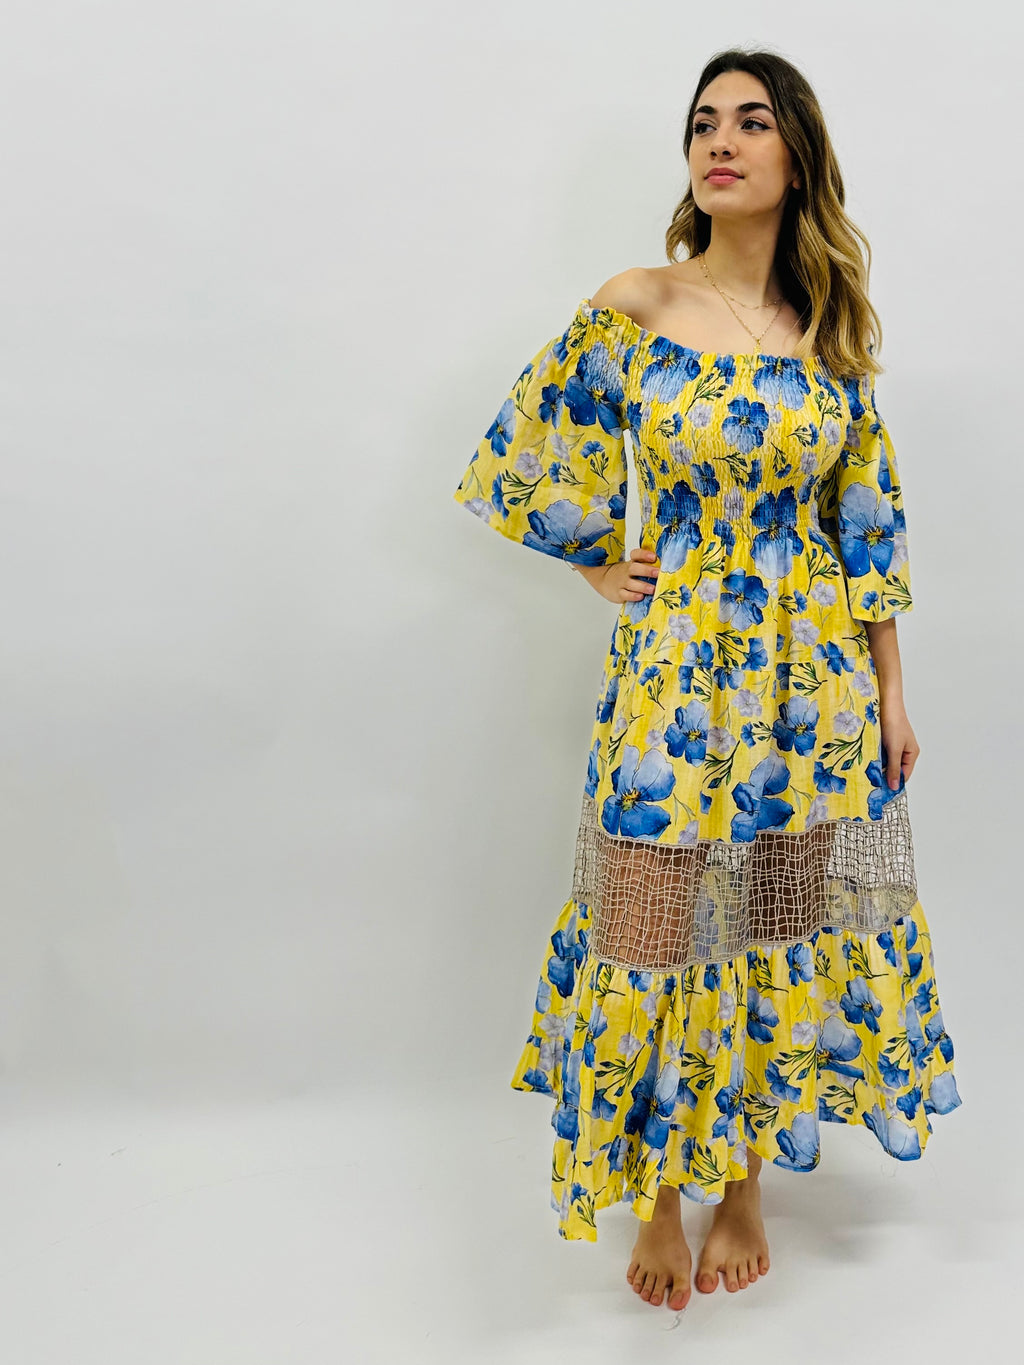 DRESS ELENA IN 100% PRINTED LINEN AND LACE